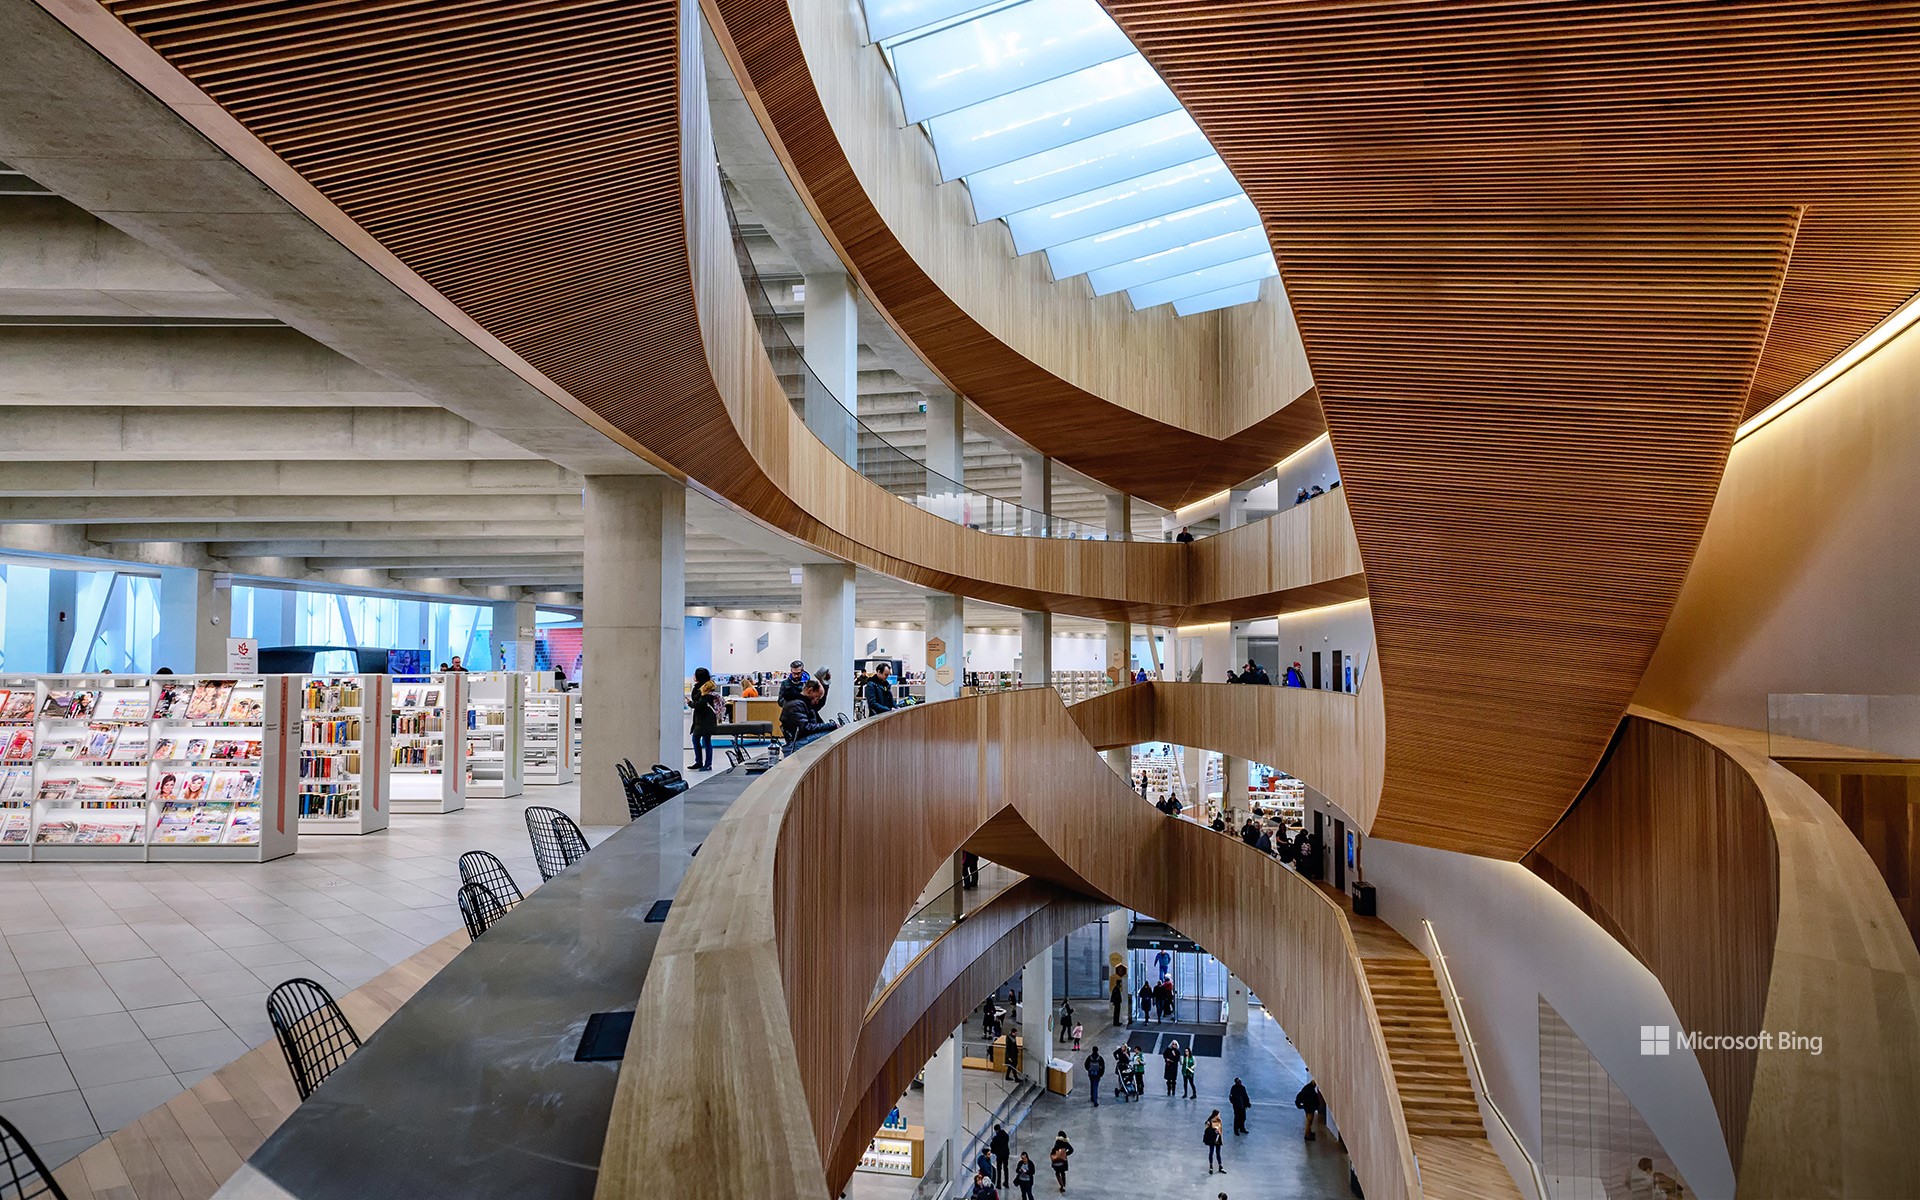 The Calgary Central Library, also known as the Calgary New Central Library